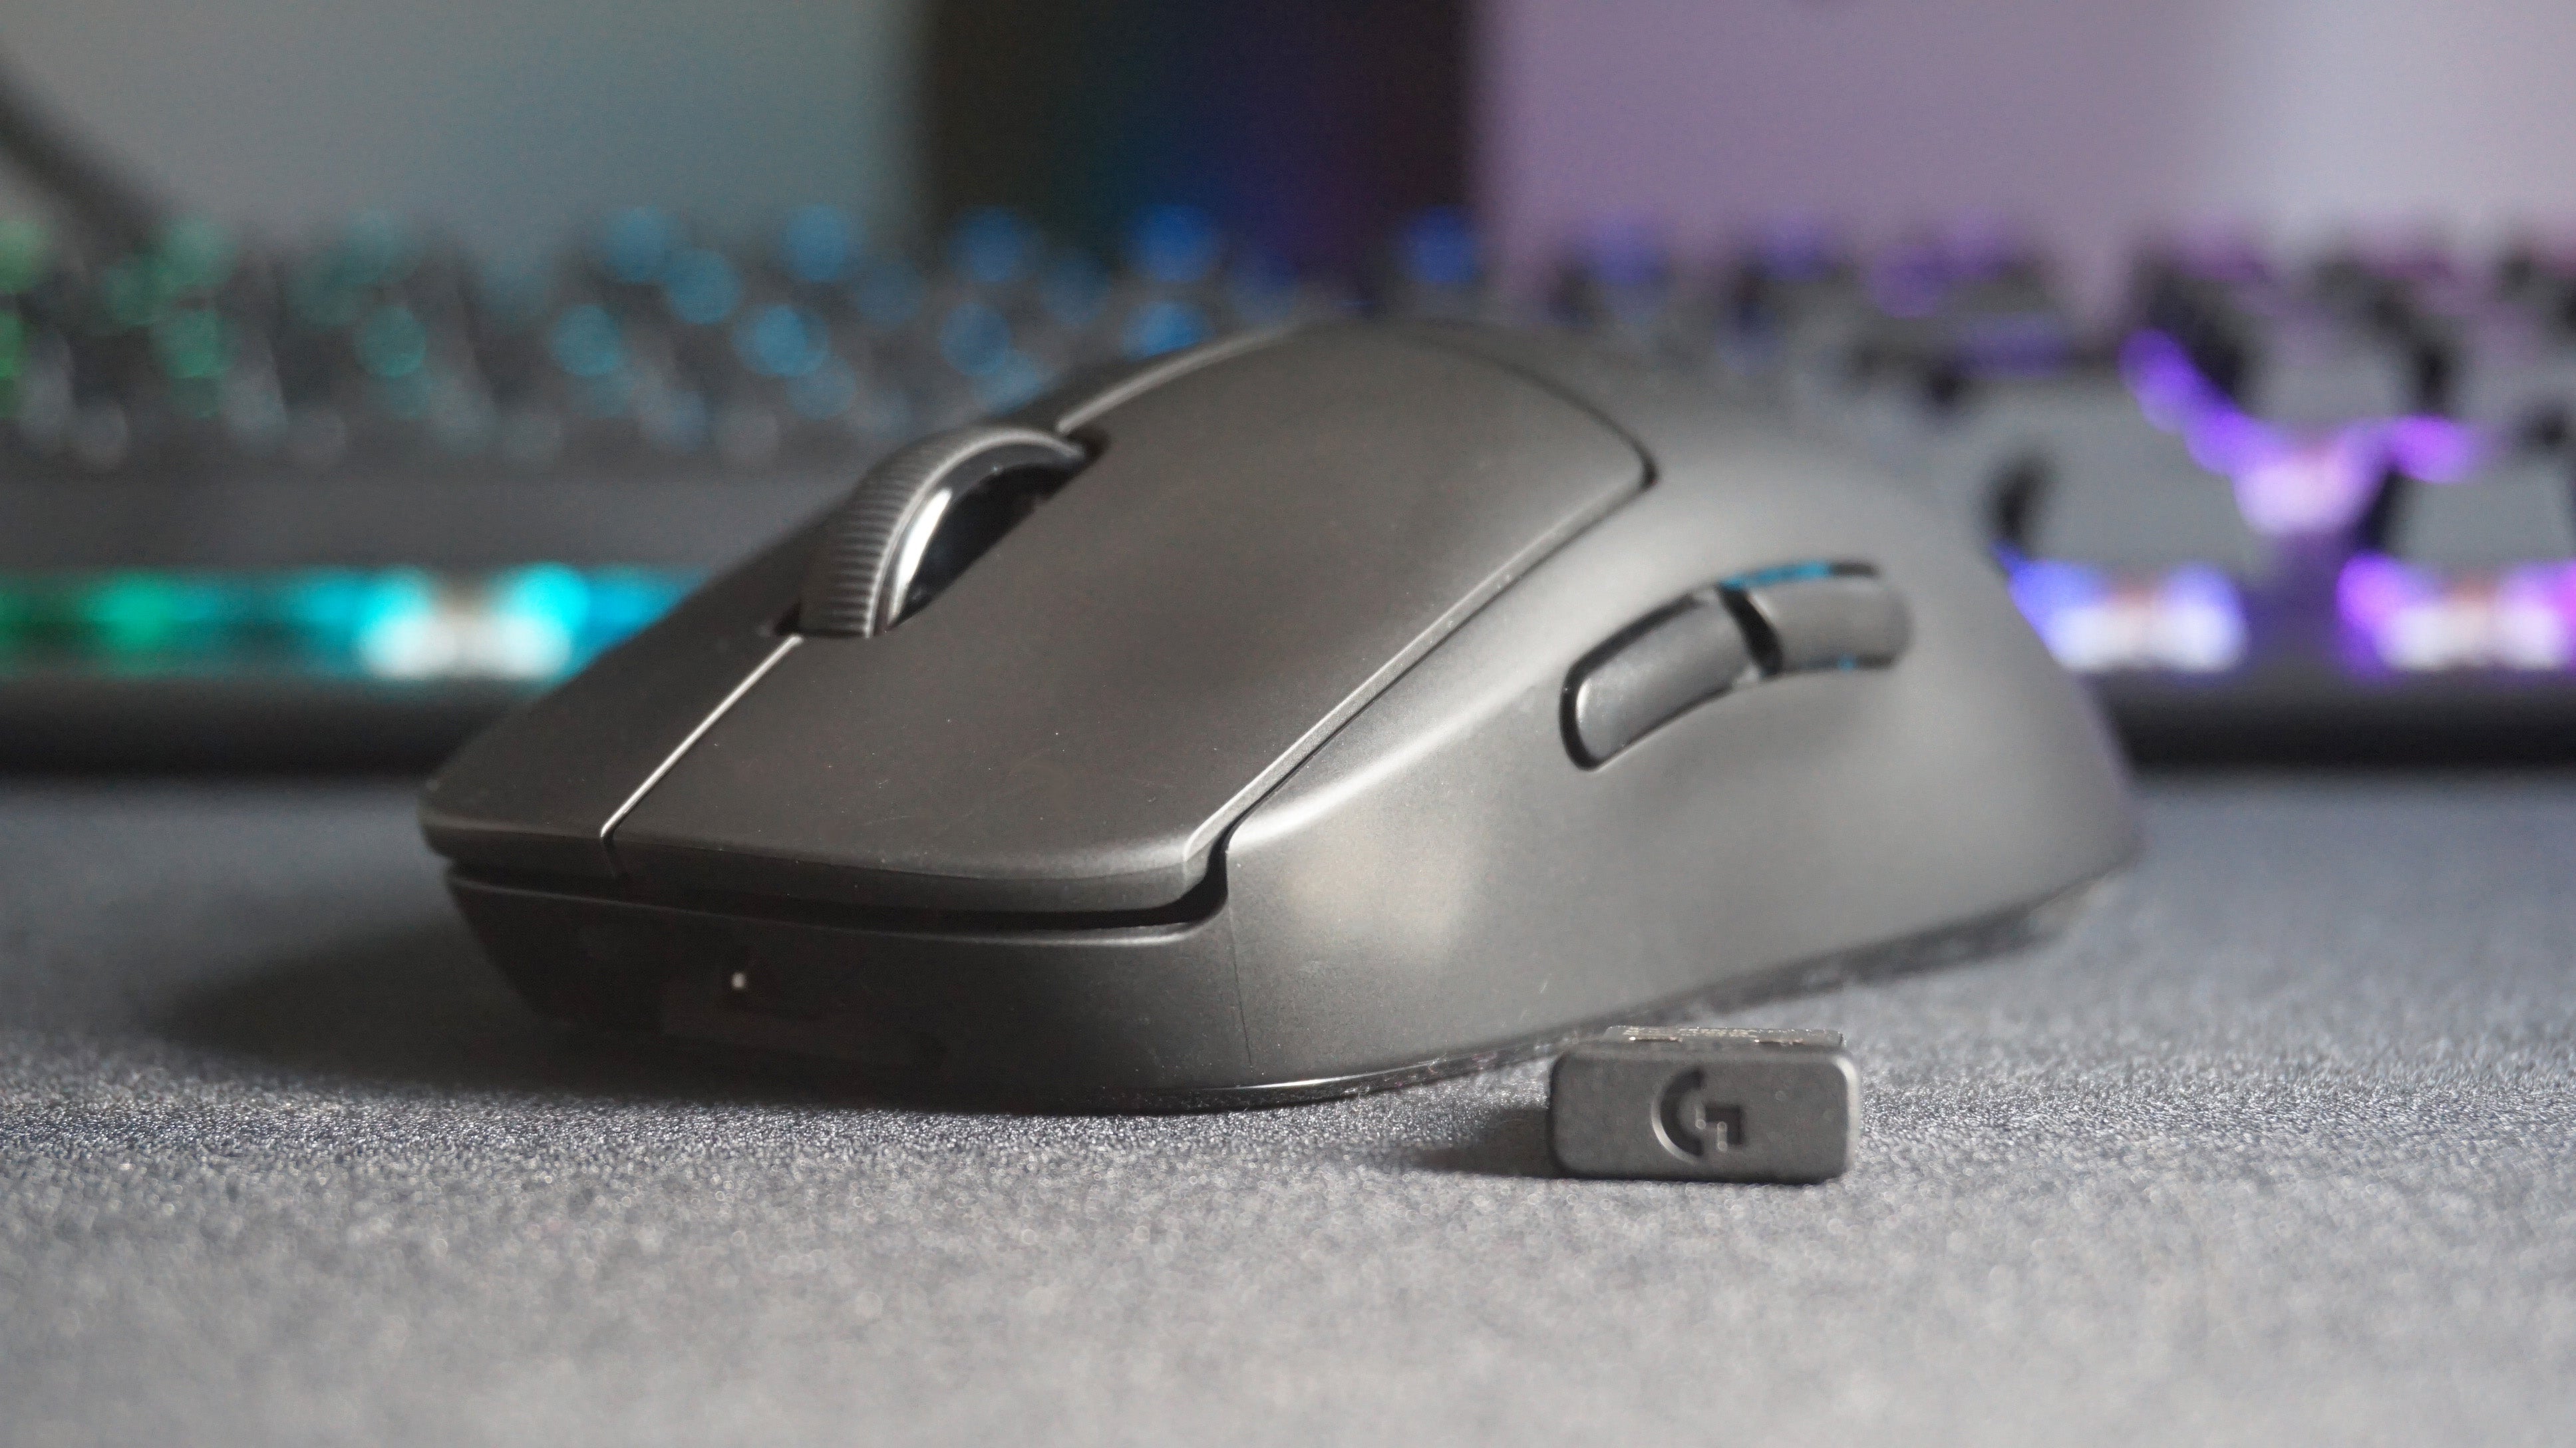 A photo of the Logitech G Pro Wireless mouse and its USB adapter